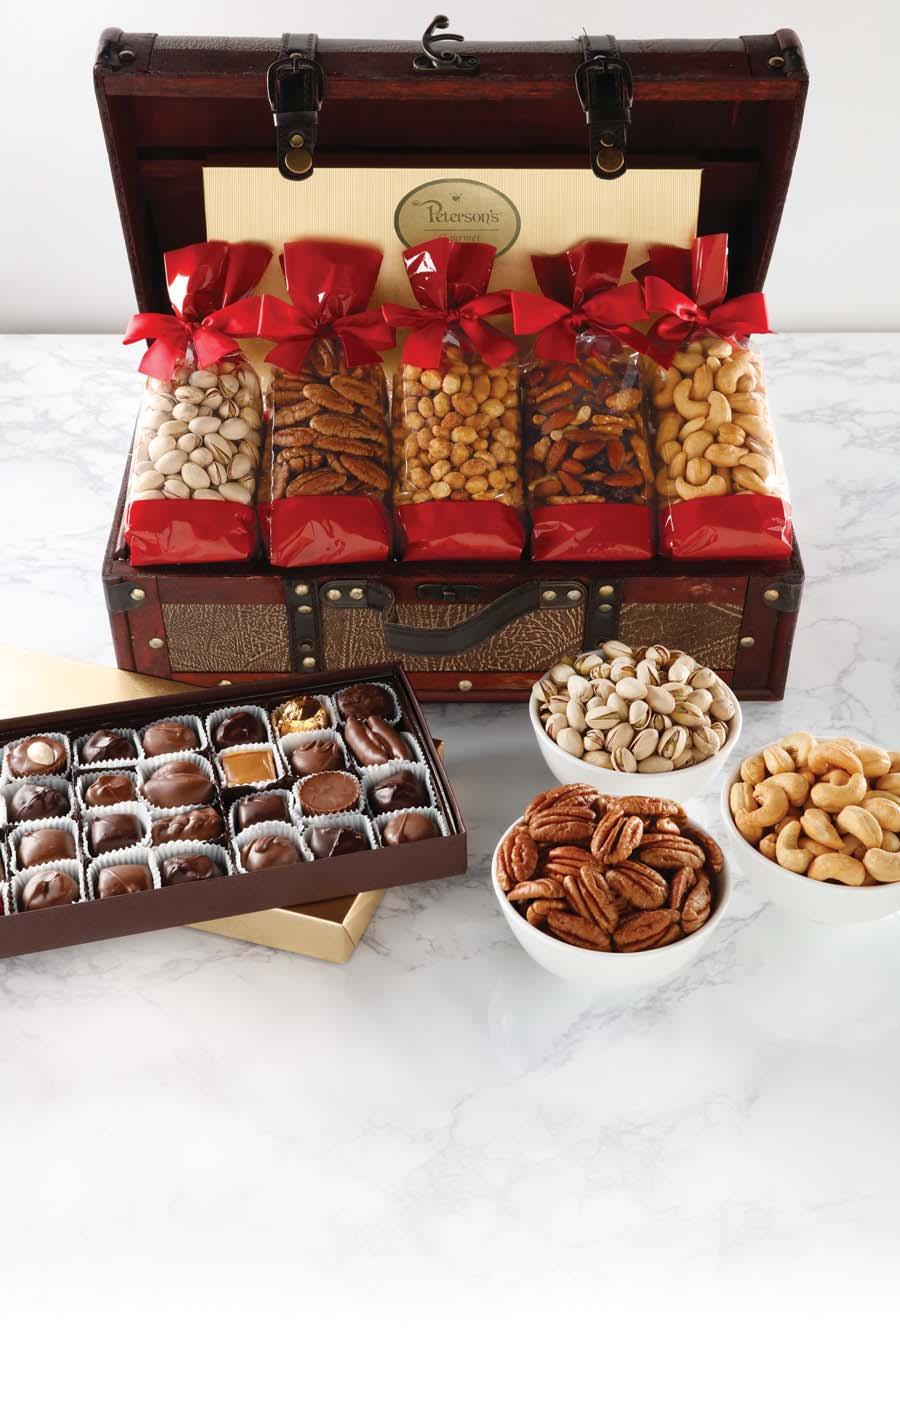 New! Keepsake Trunk We start with a generous assortment of five Peterson s favorites, including: California natural Pistachios, mammoth Pecan halves, sweet and salty Honey Peanuts, savory Cranberry